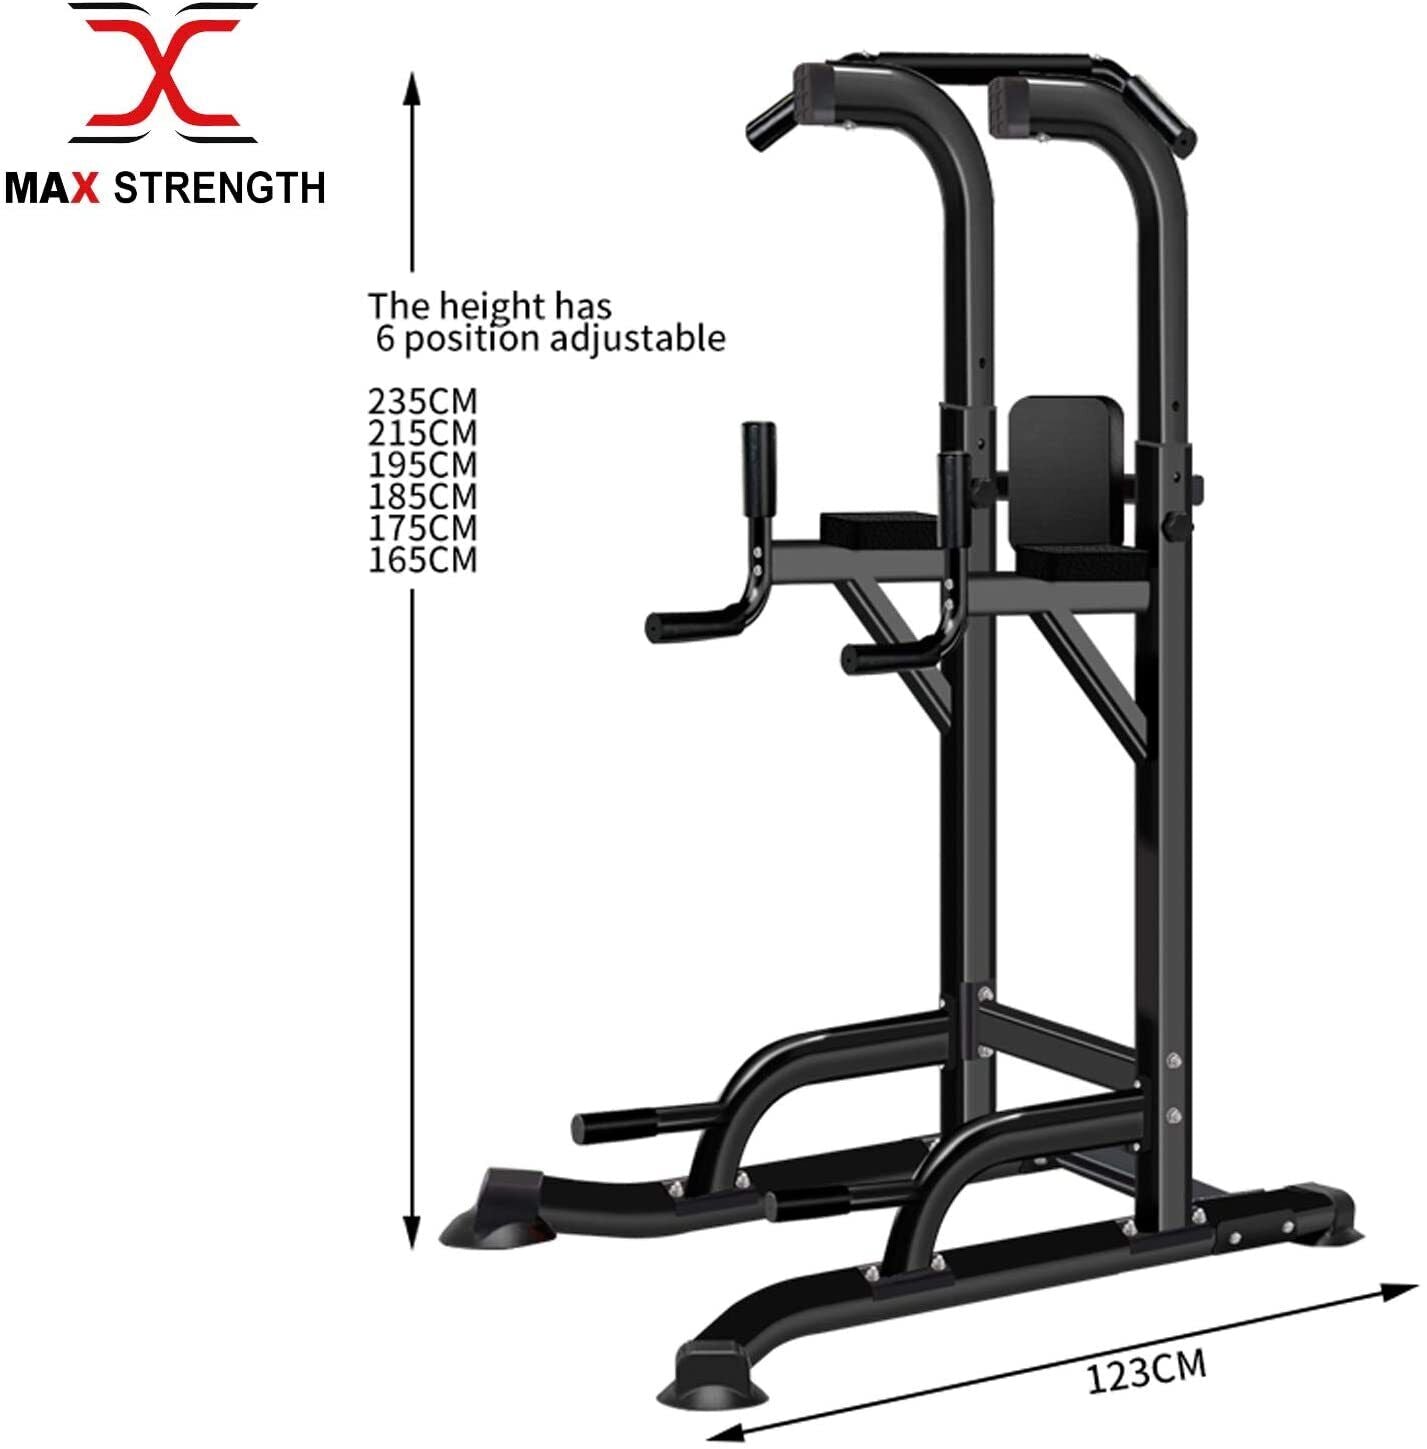 X MAXSTRENGTH Power Tower Dip Station Pull Up